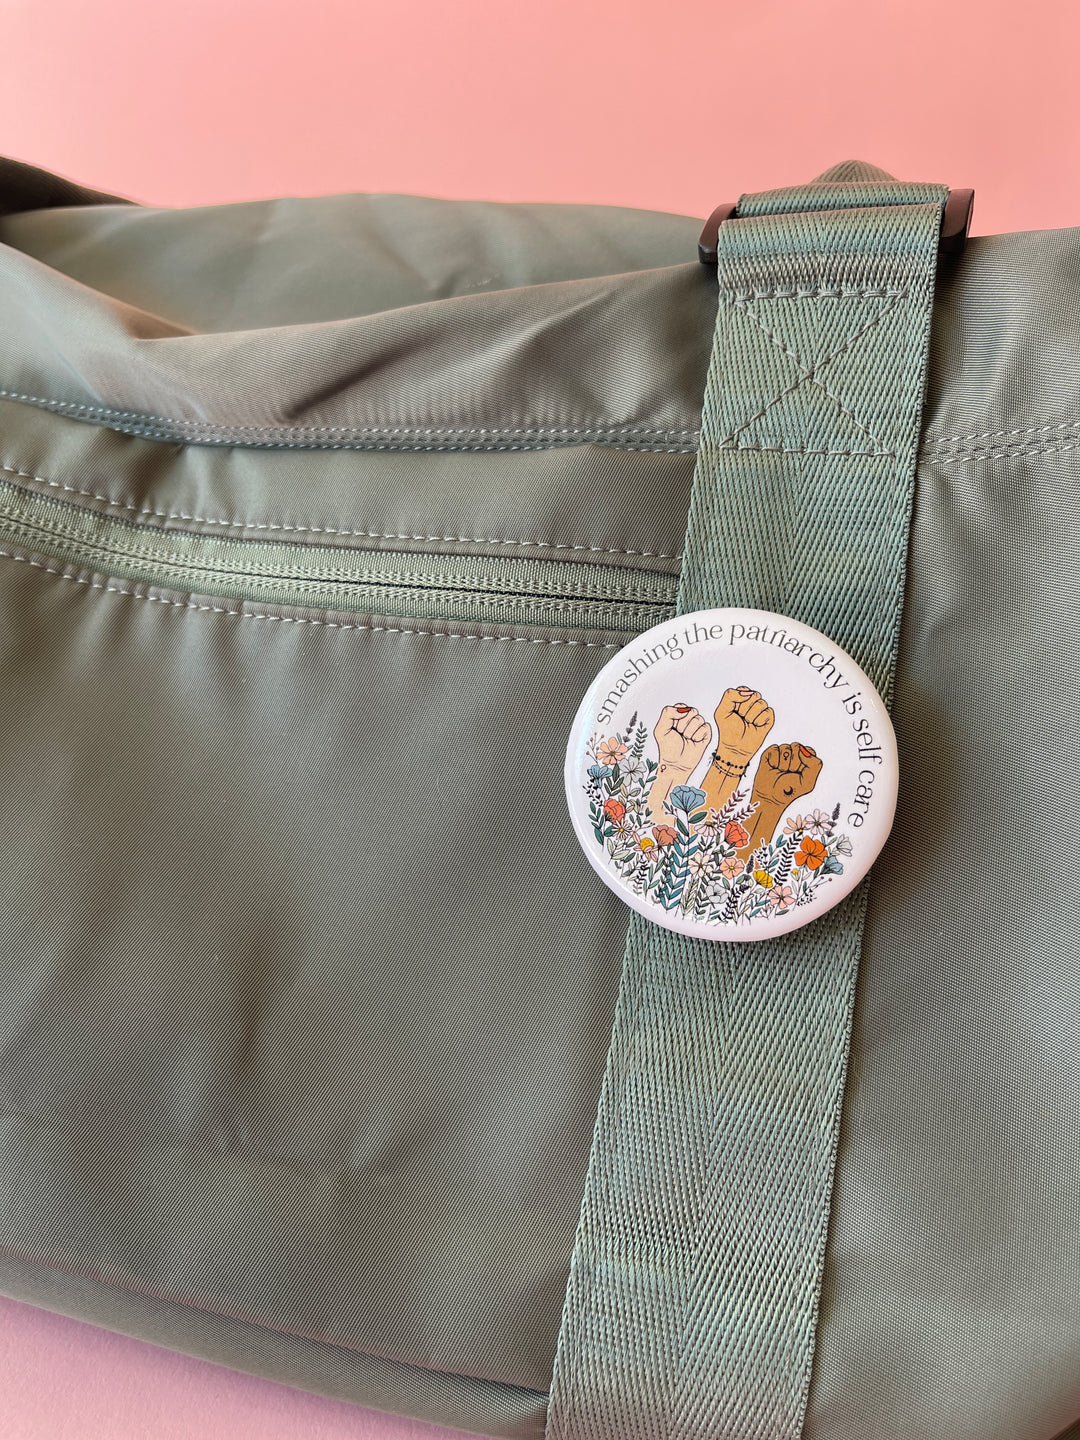 Smashing The Patriarchy Is Self Care Pinback Button